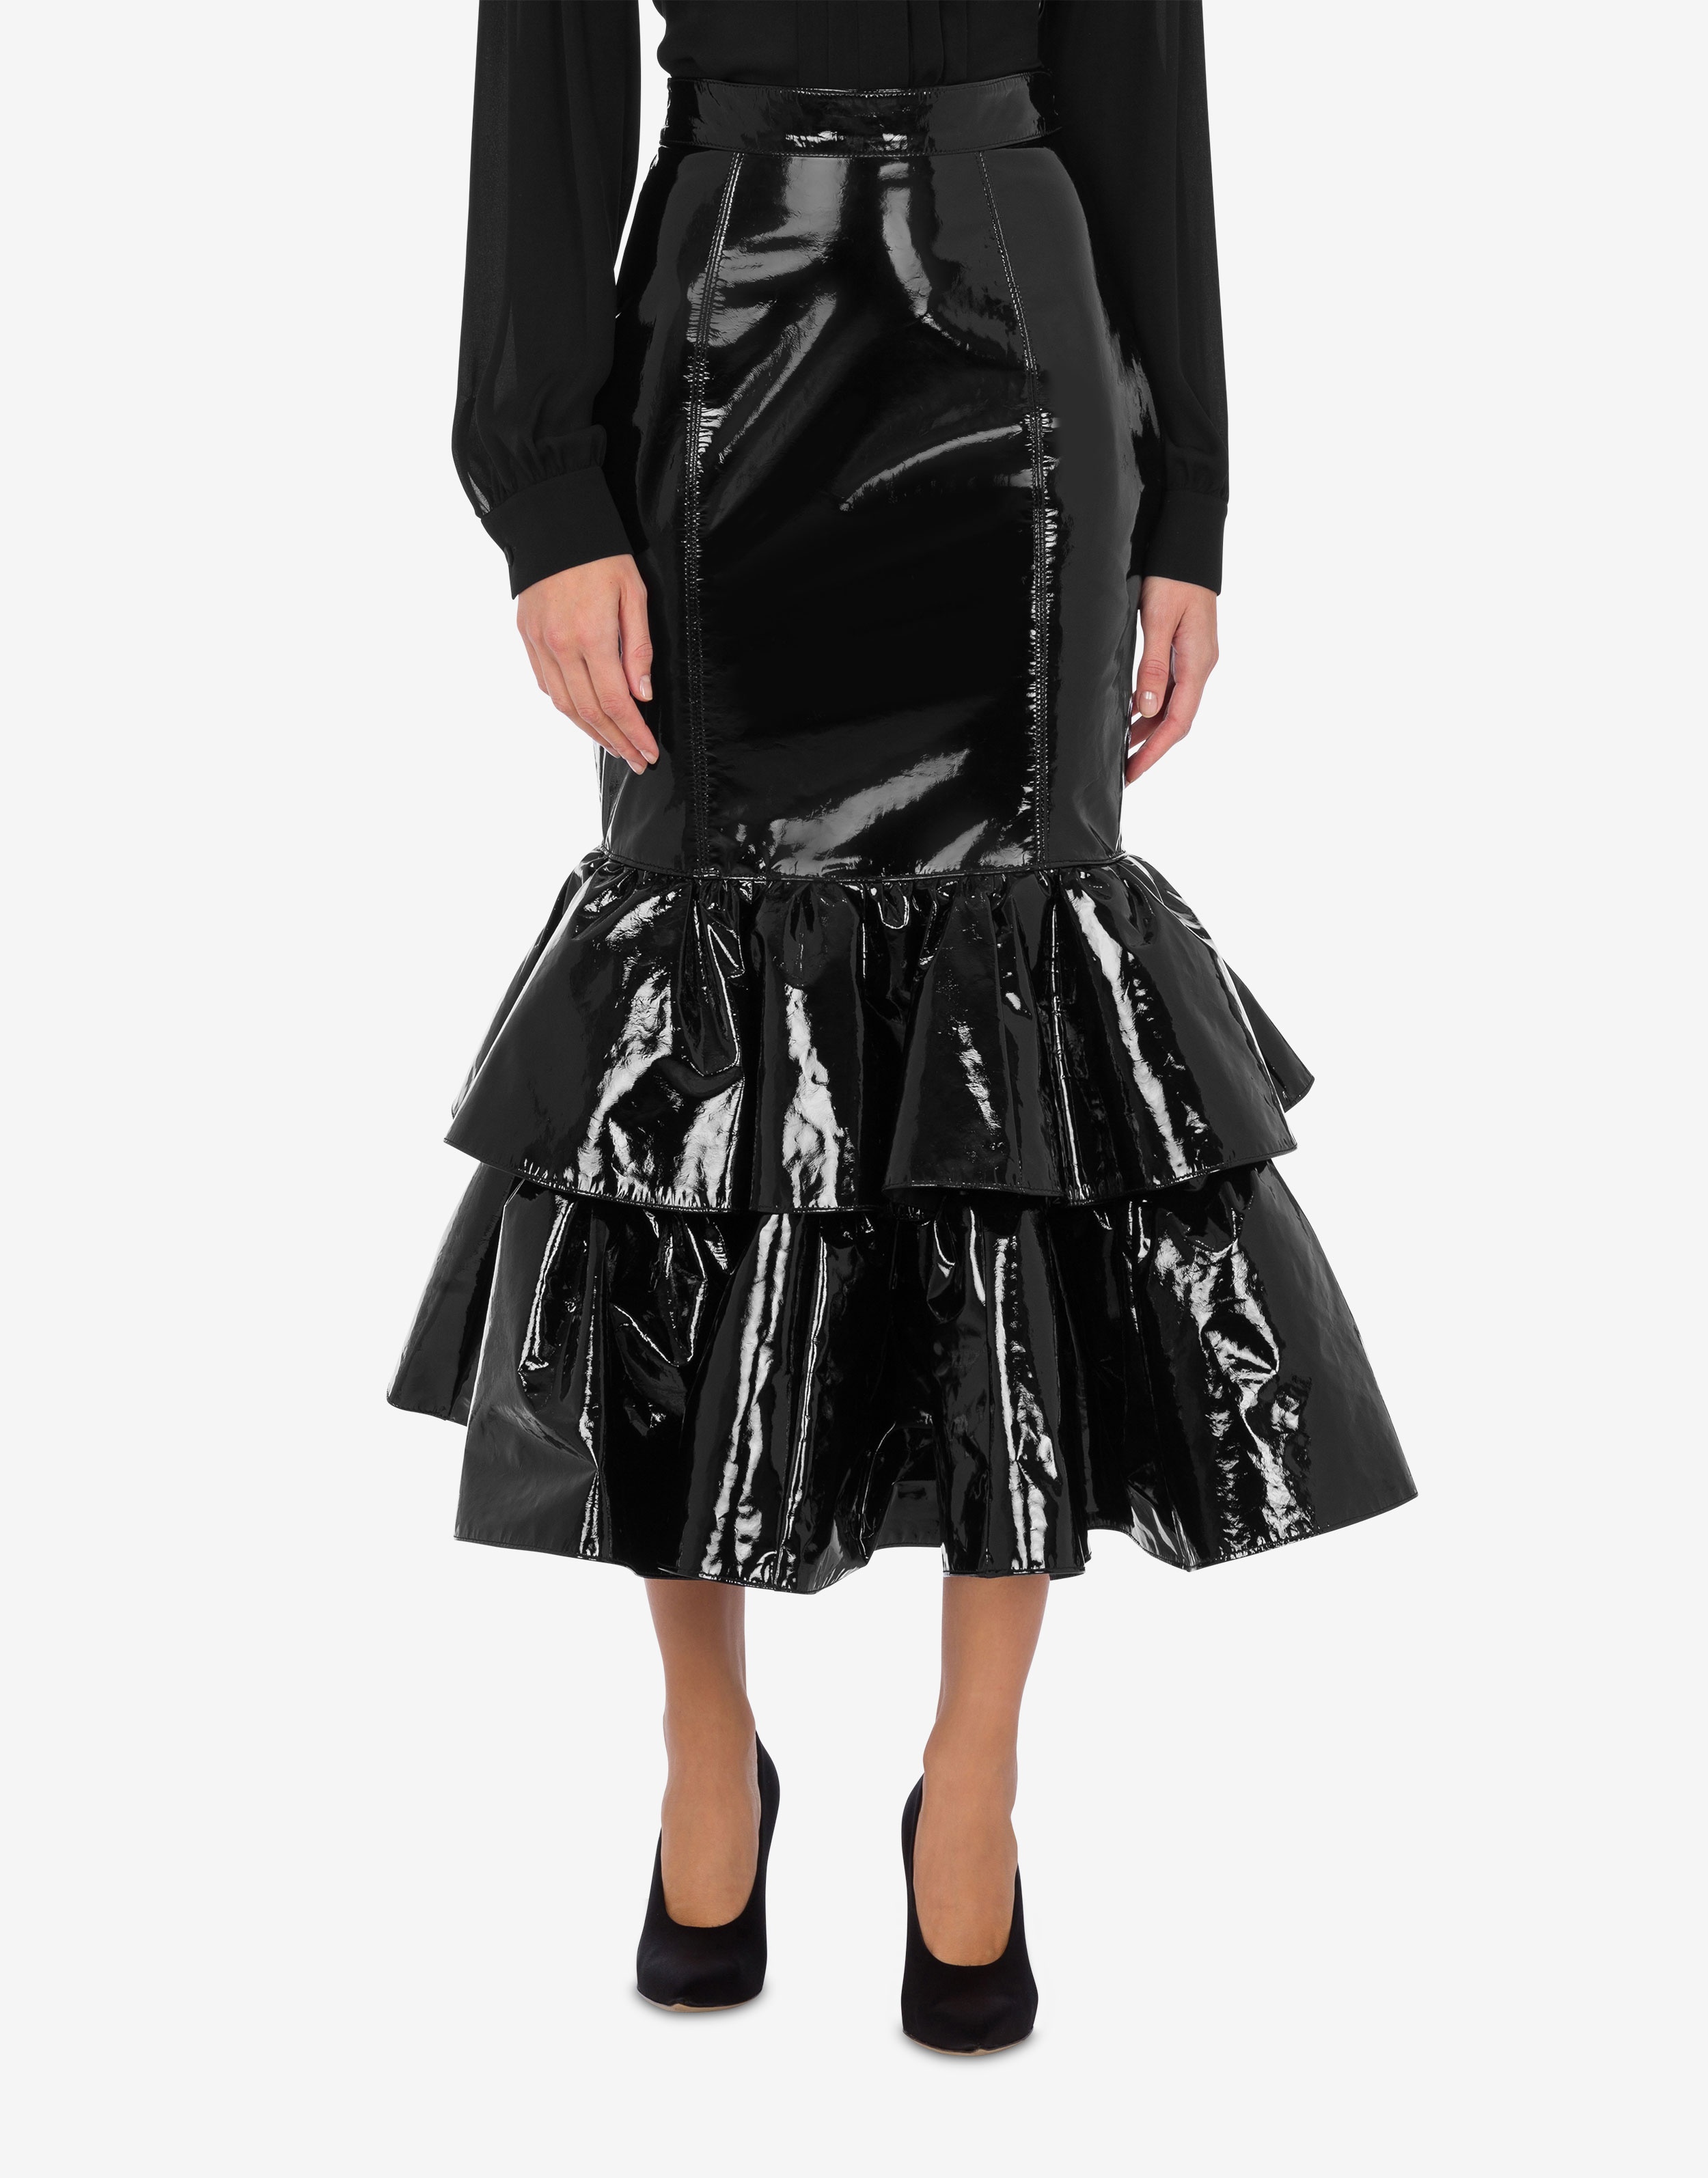 PATENT LEATHER SKIRT WITH RUFFLES - 2